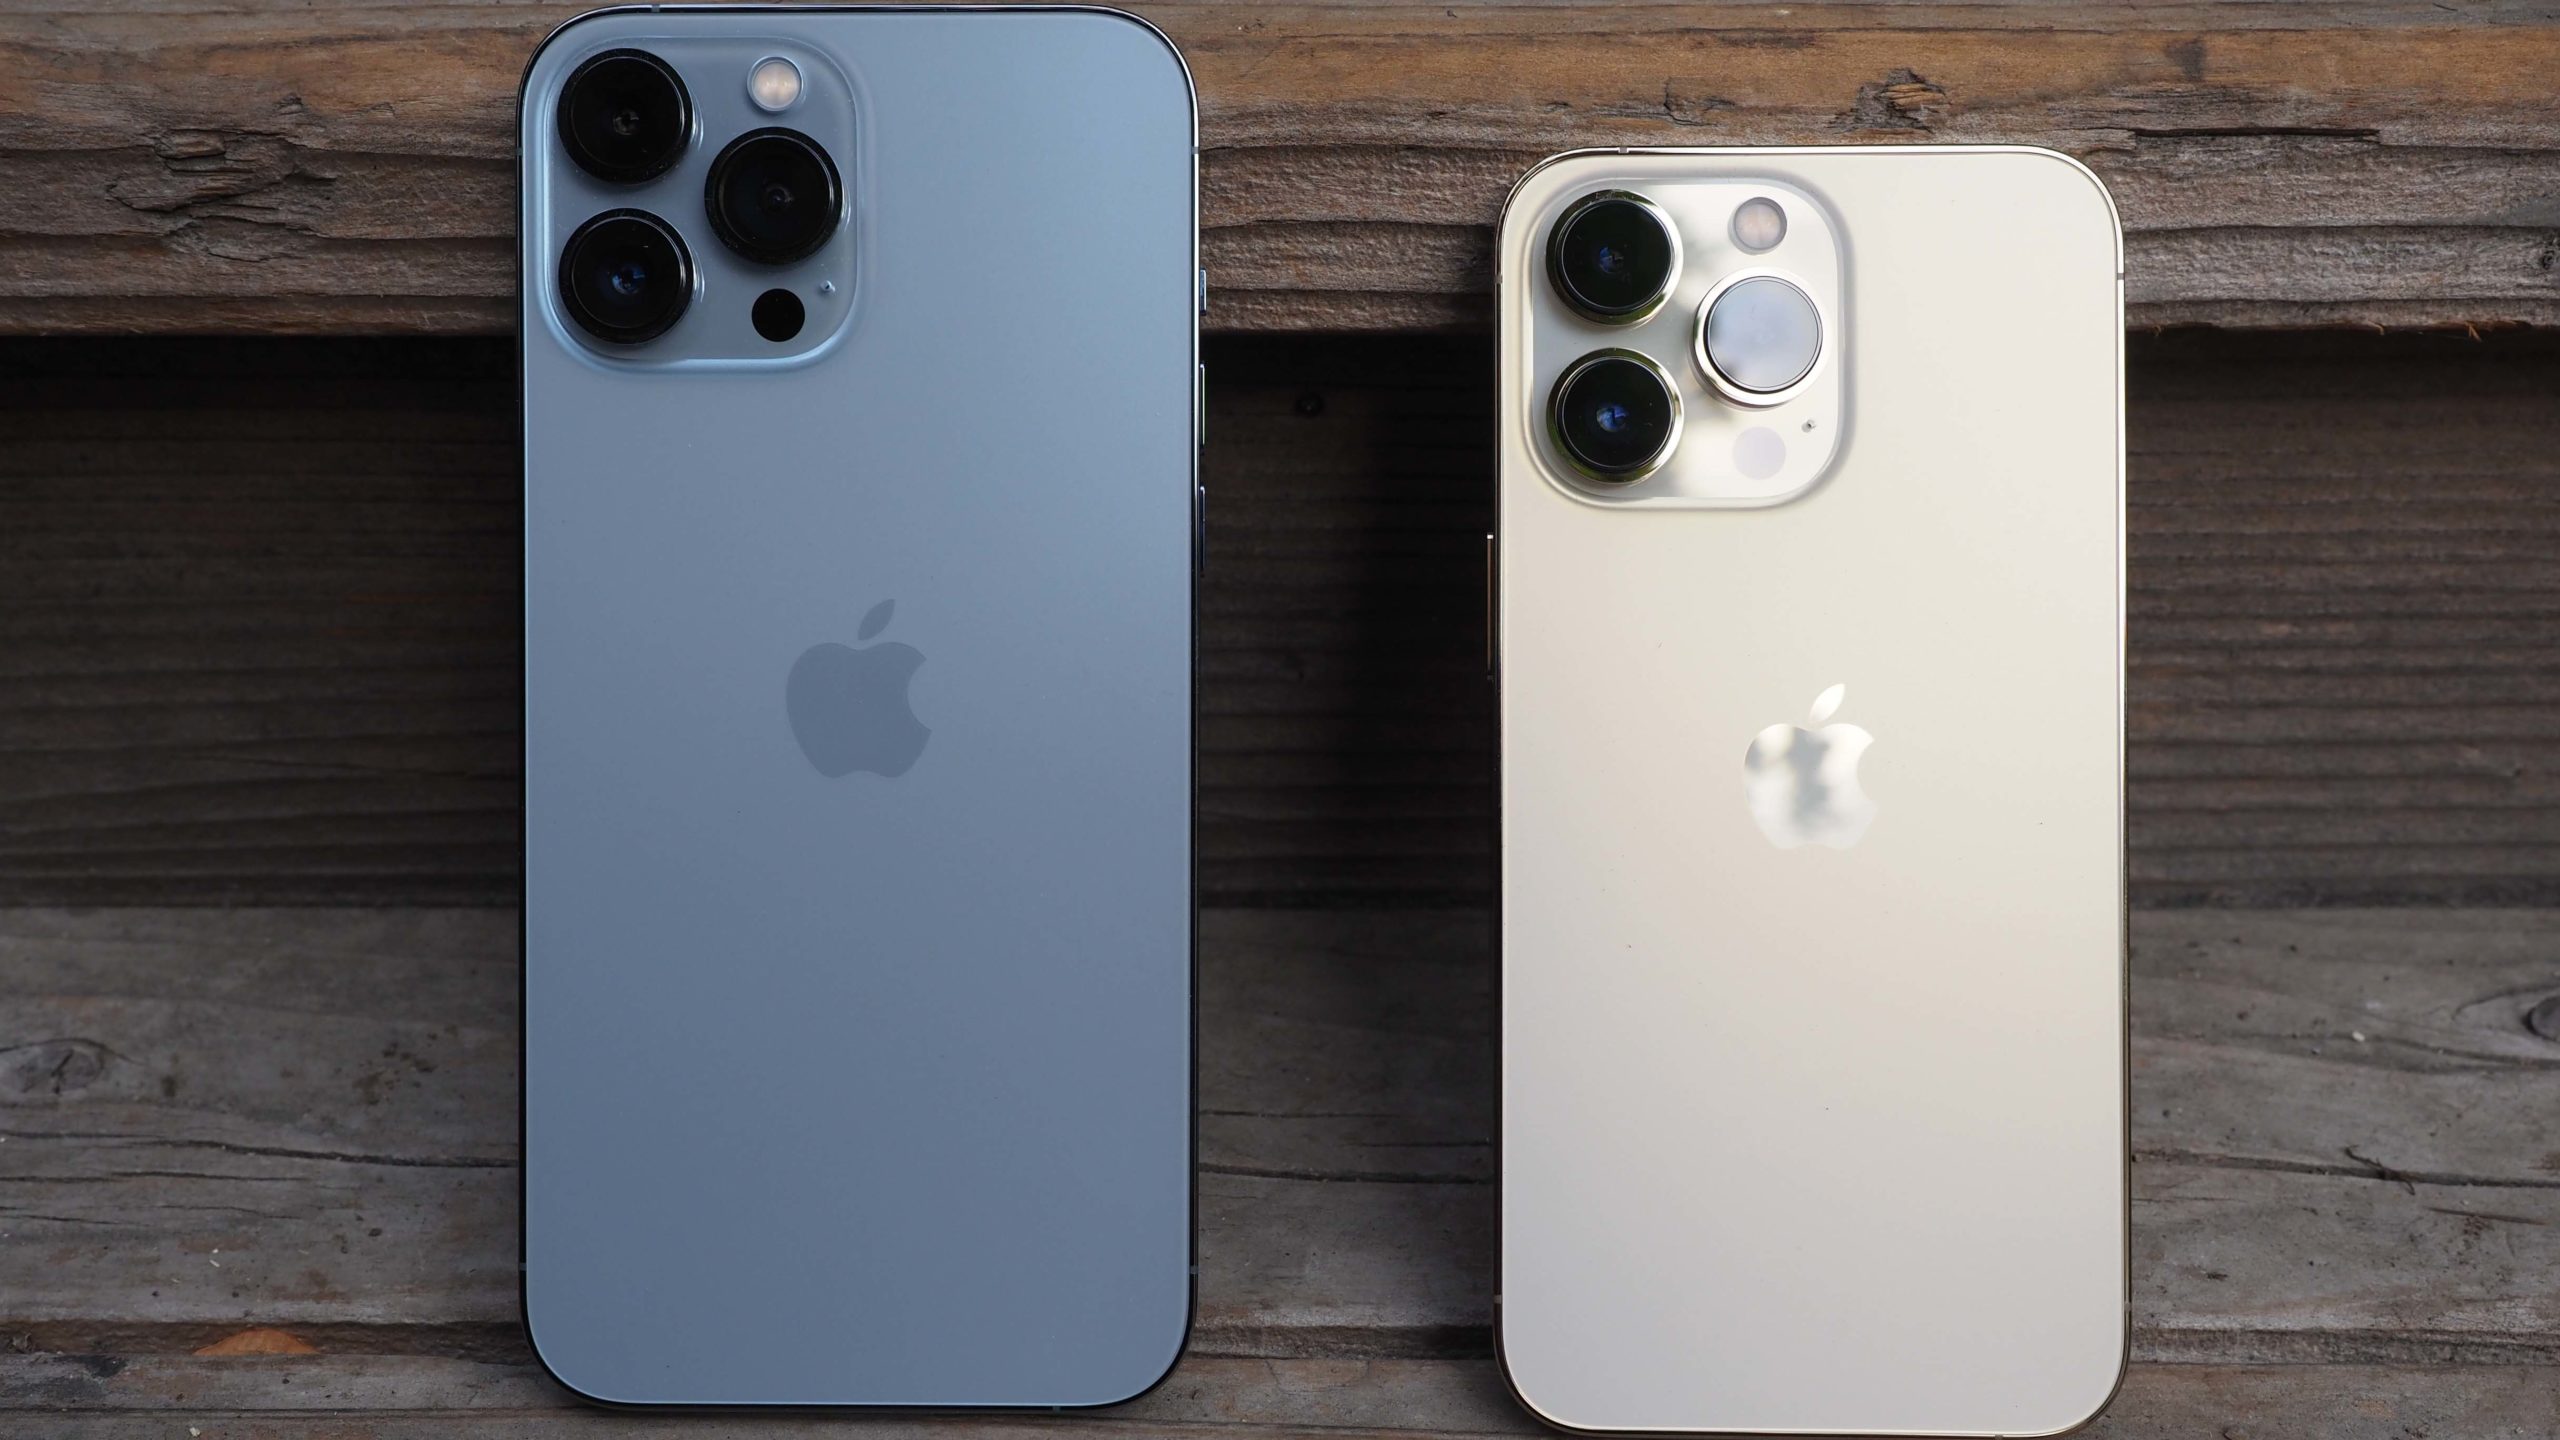 The iPhone 13 Pro and Pro Max run on the new A15 Bionic processor and are 5G-enabled. (Photo: Caitlin McGarry/Gizmodo)